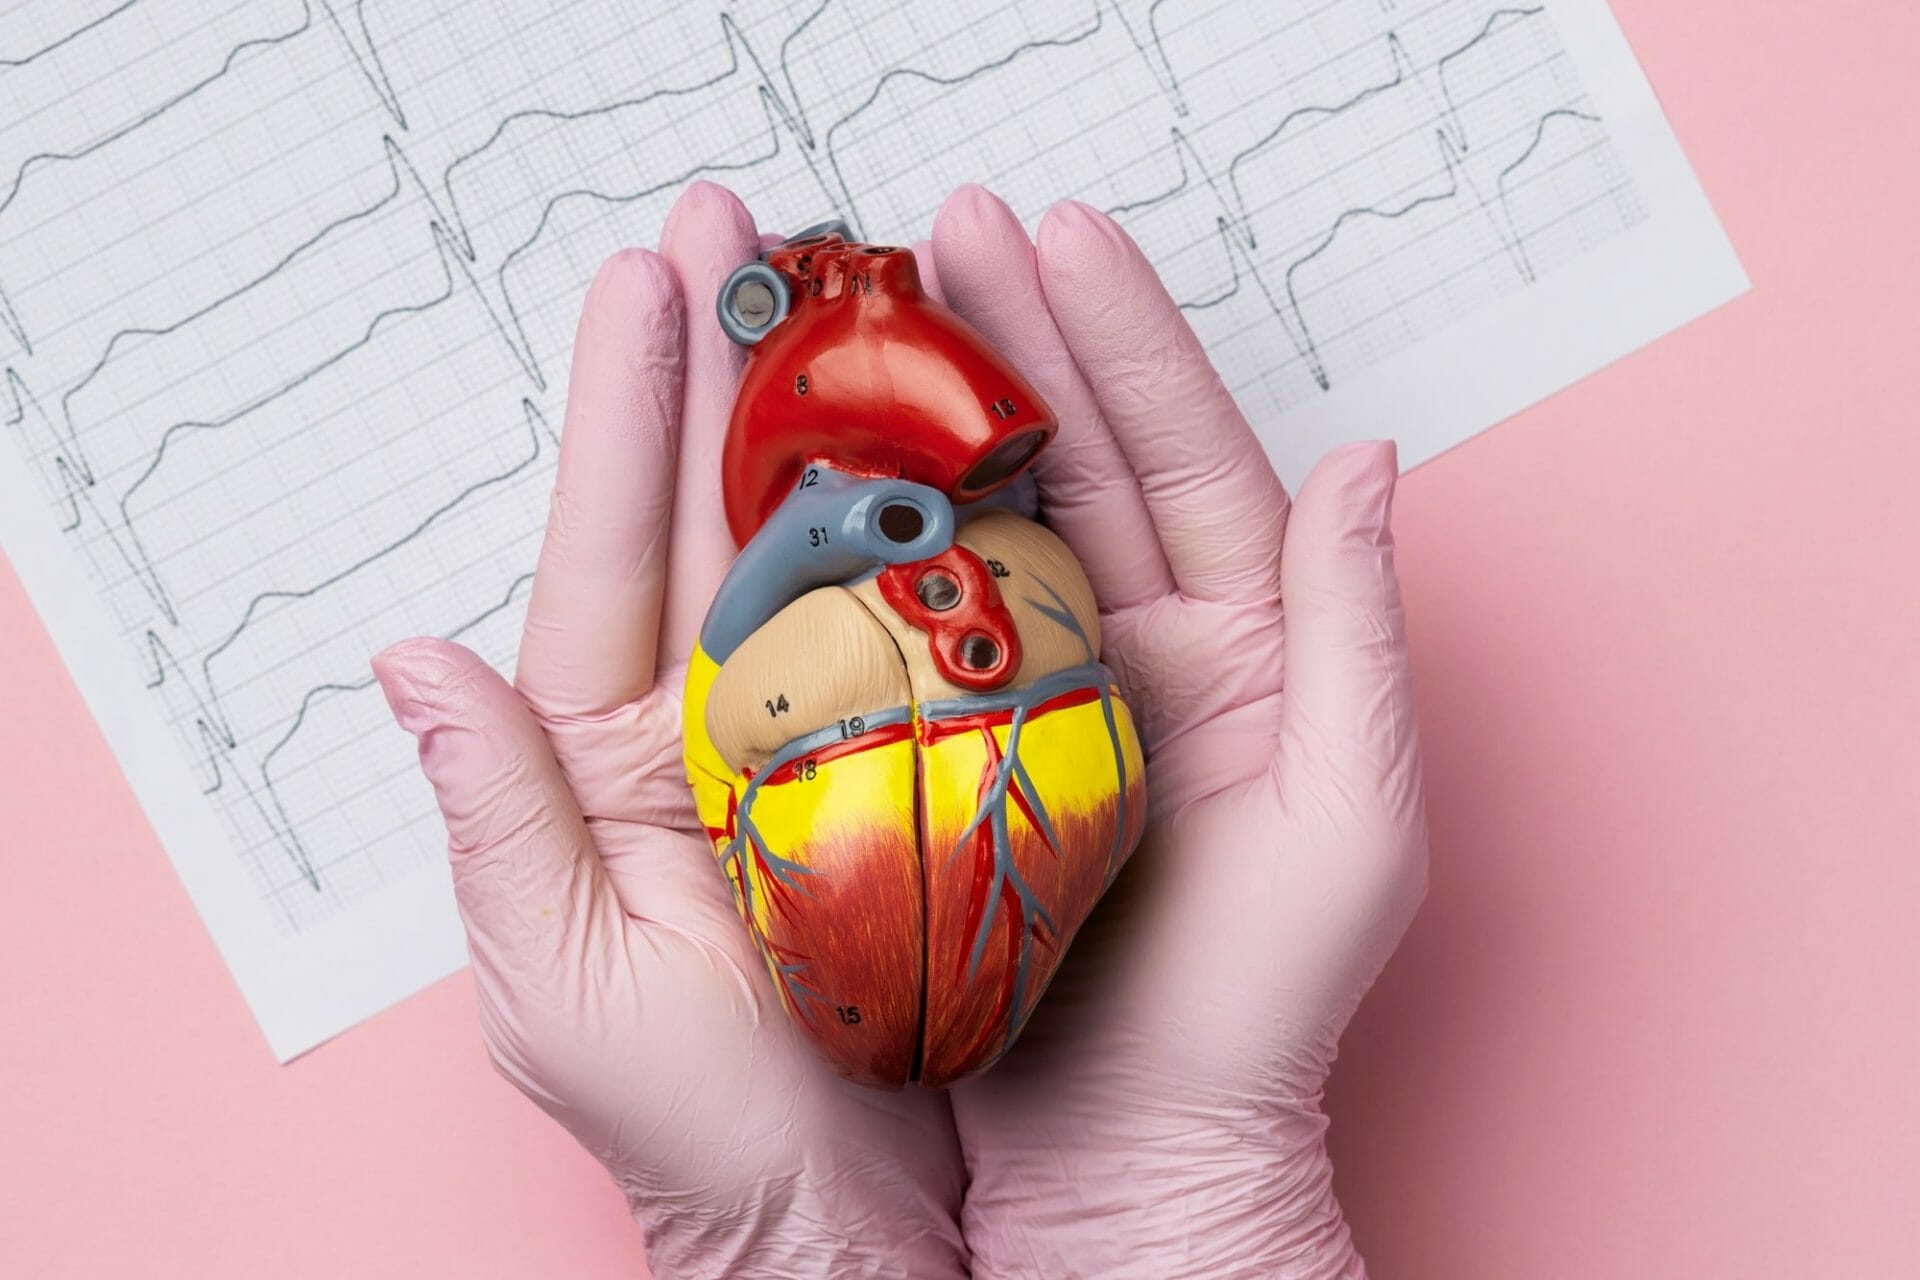 Atrial Fibrillation : A General Overview